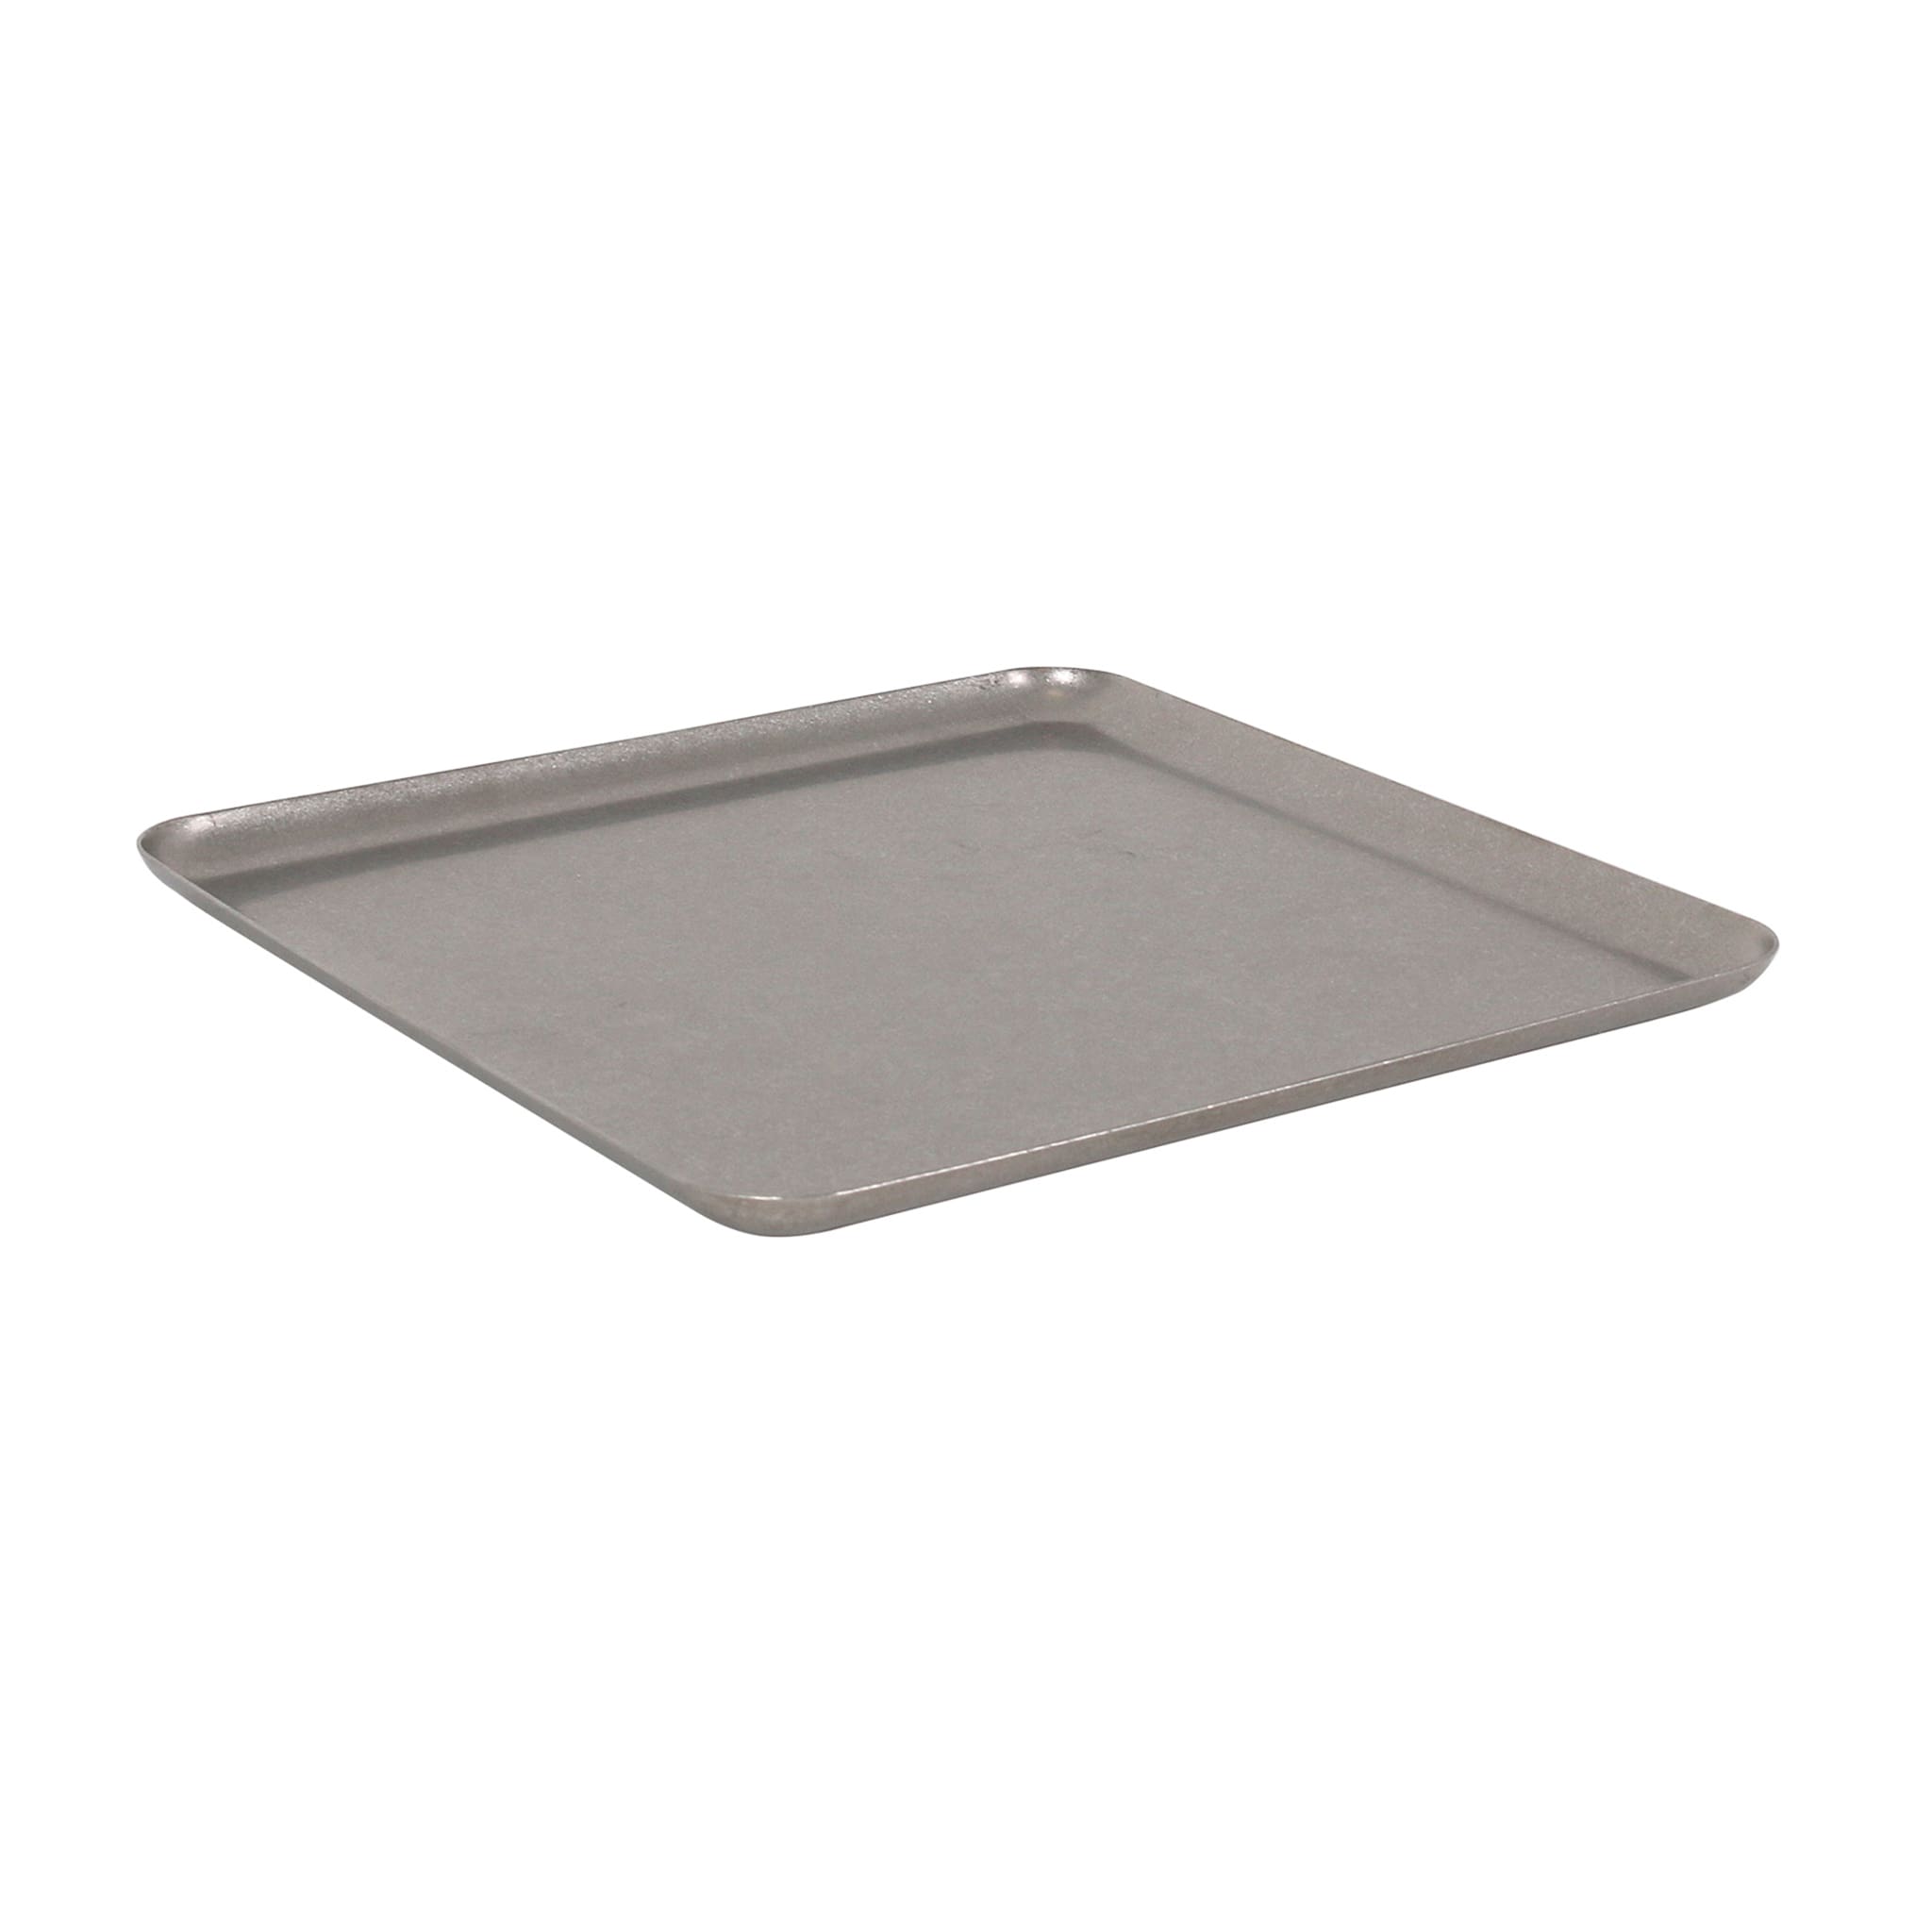 Vintage Style Stainless Steel Square Serving Tray, 19cm